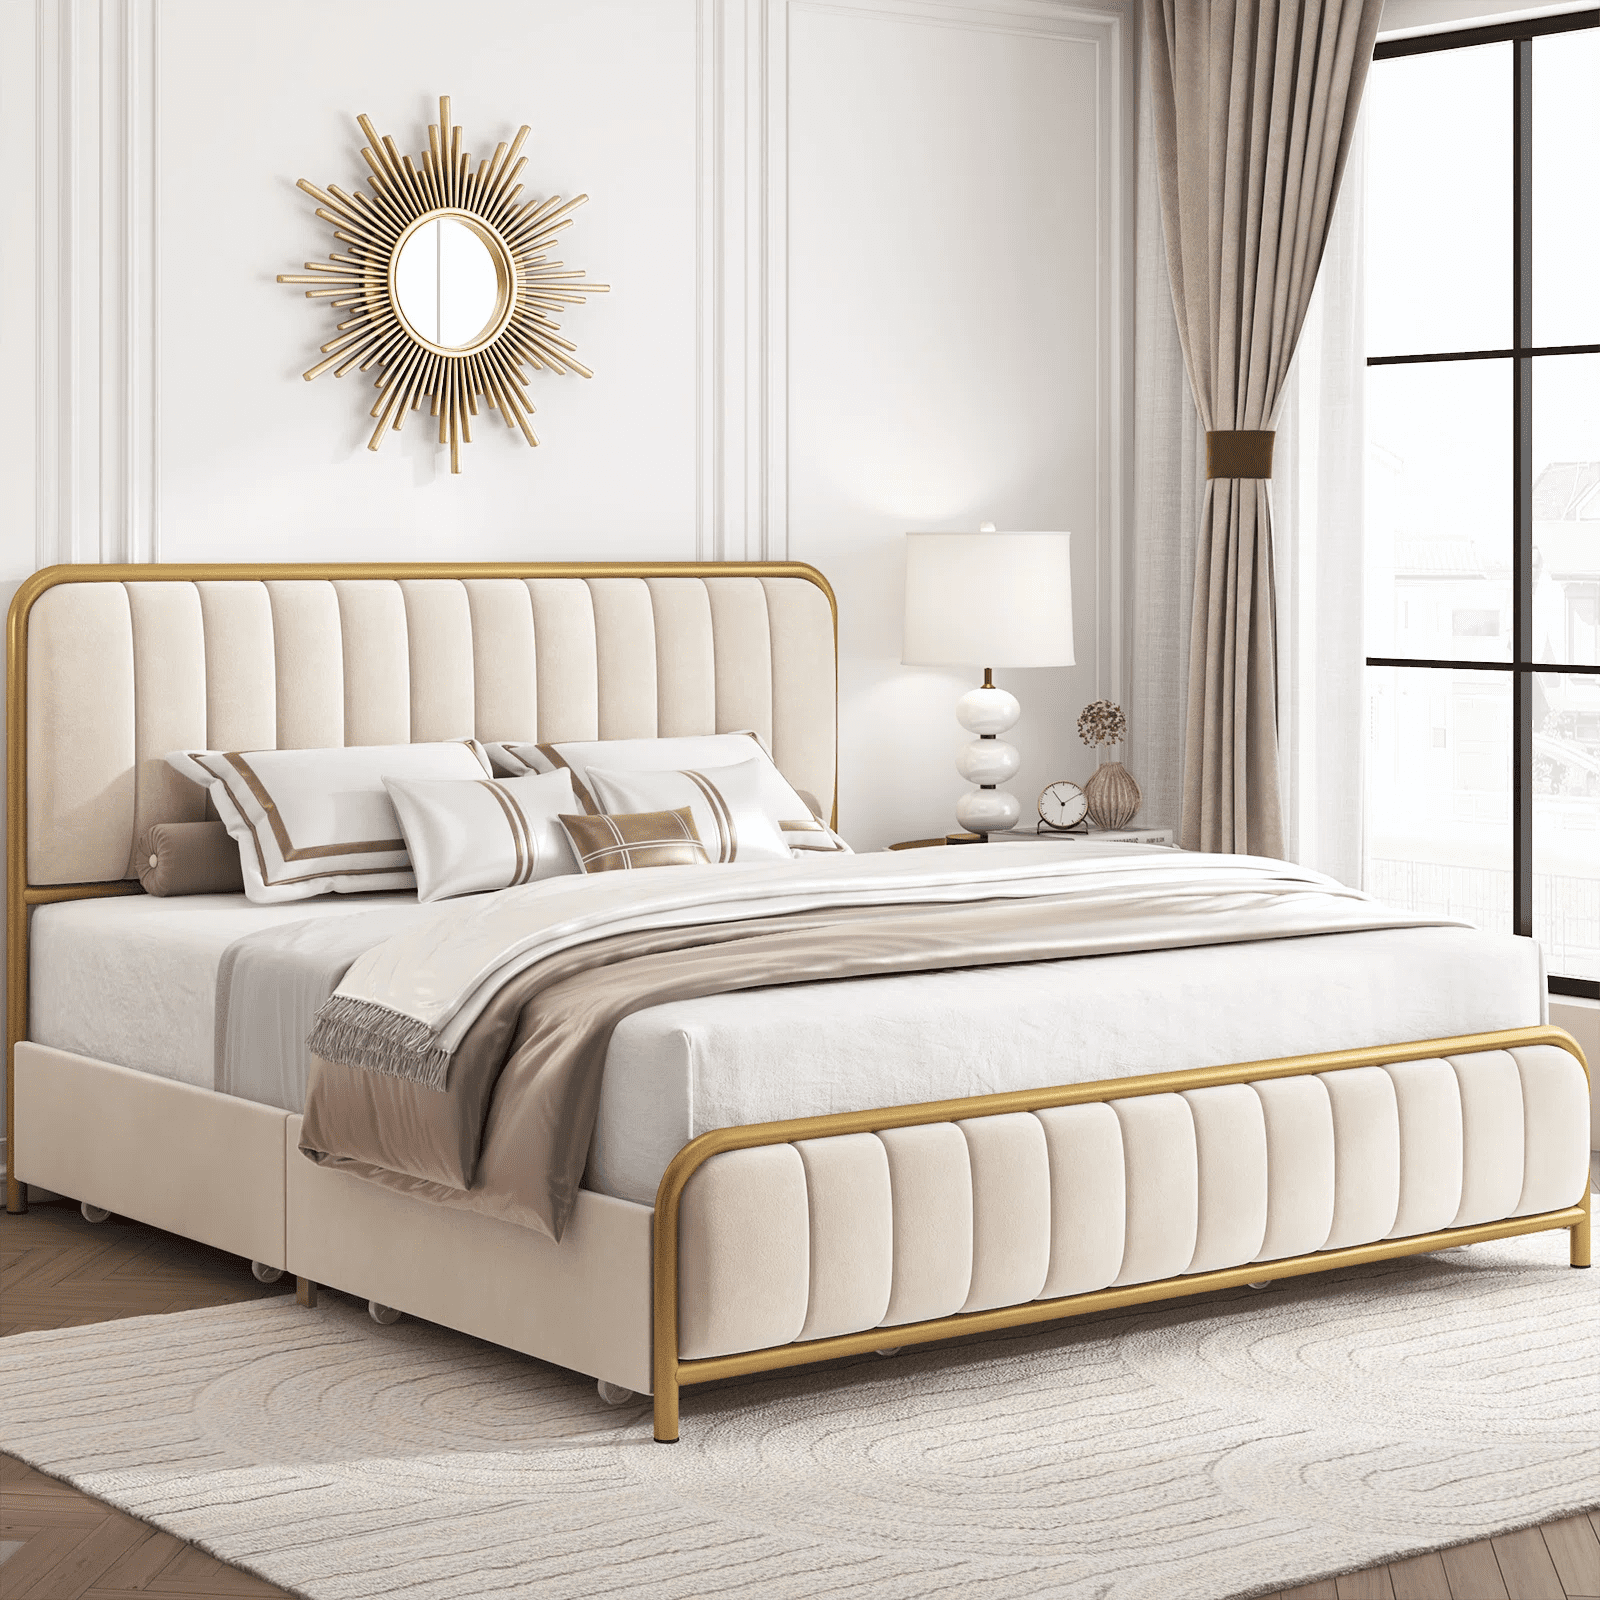 King Size Bed Frame Upgrade Your Bedroom with a Stylish and Spacious Bed Frame